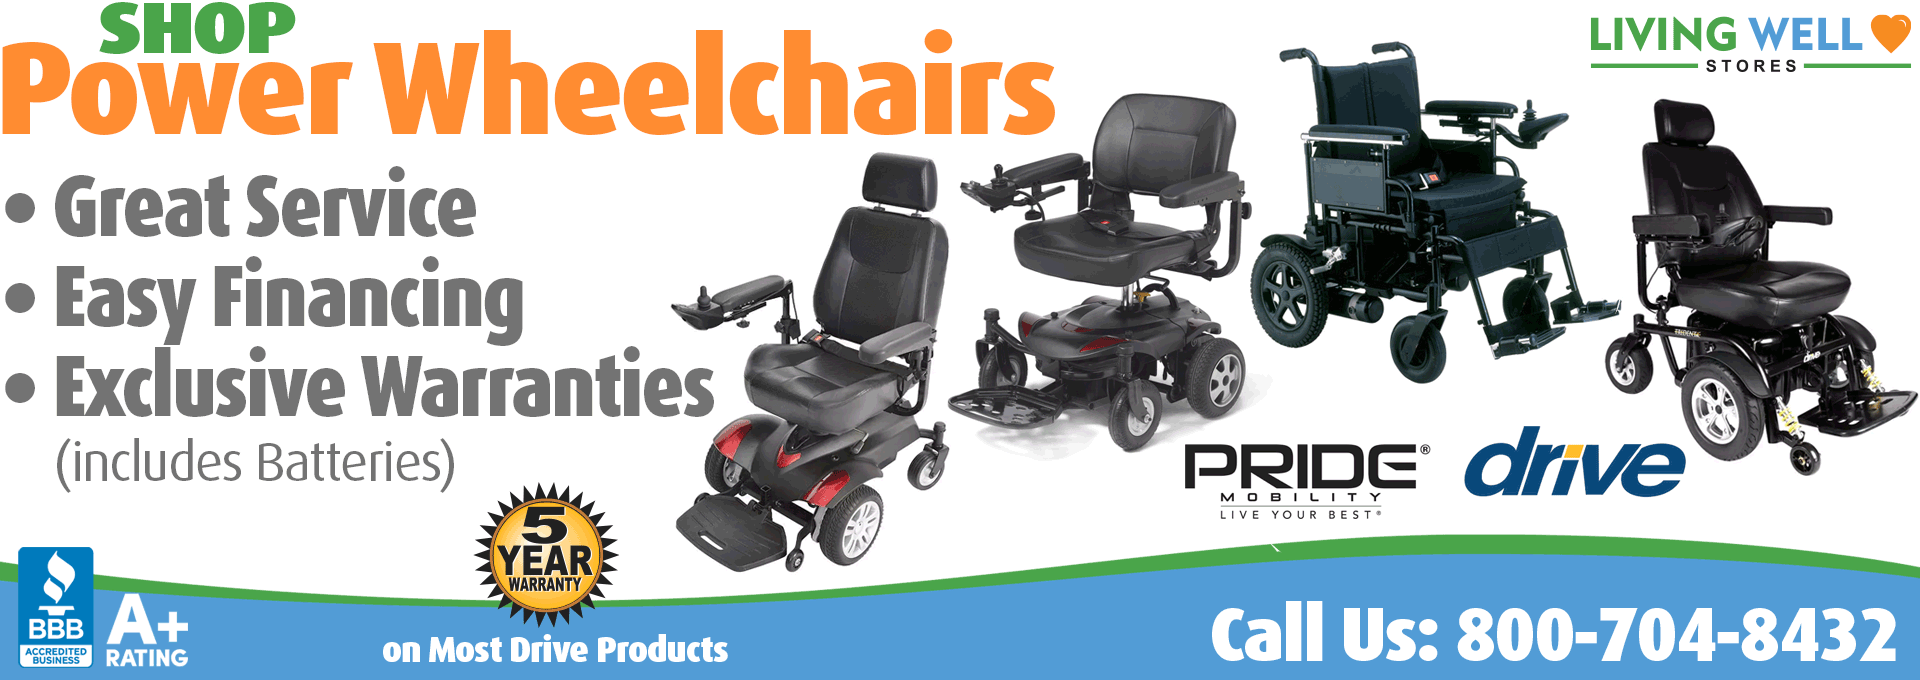 Living Well Stores: Power Wheelchairs for all types of customers, featuring Drive Medical, Pride Mobility Jazzy, and more.